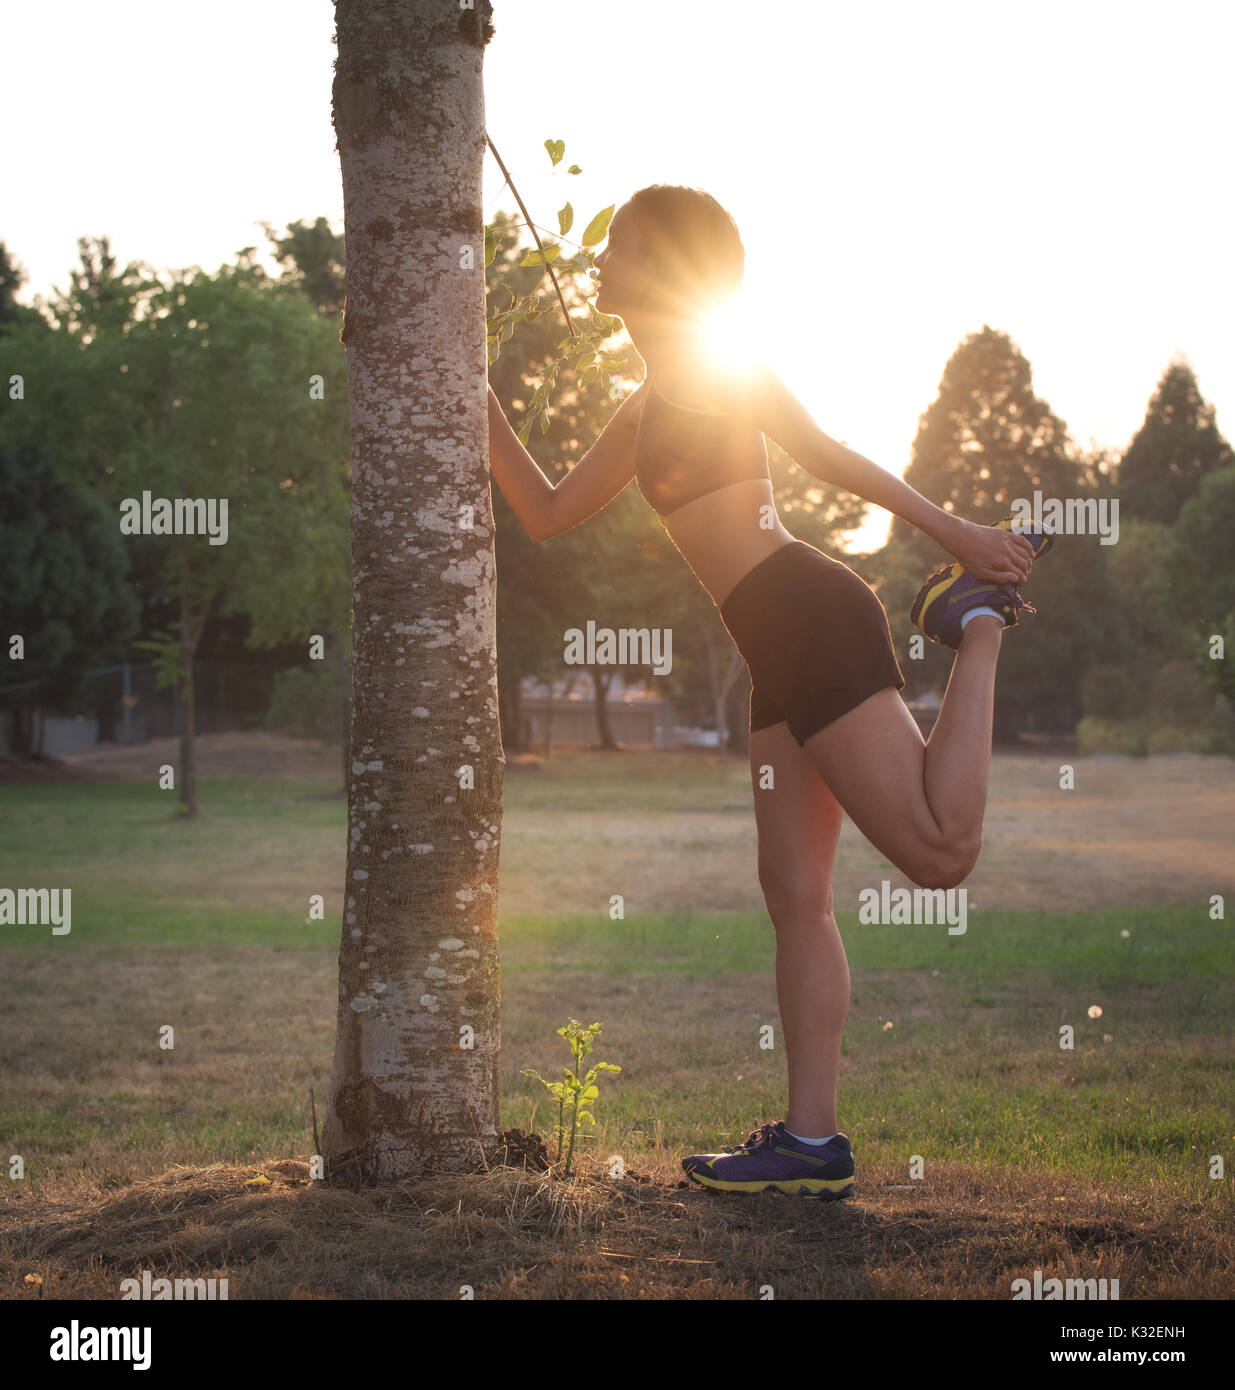 A female runner stretches her legs at sunset in a park. Stock Photo